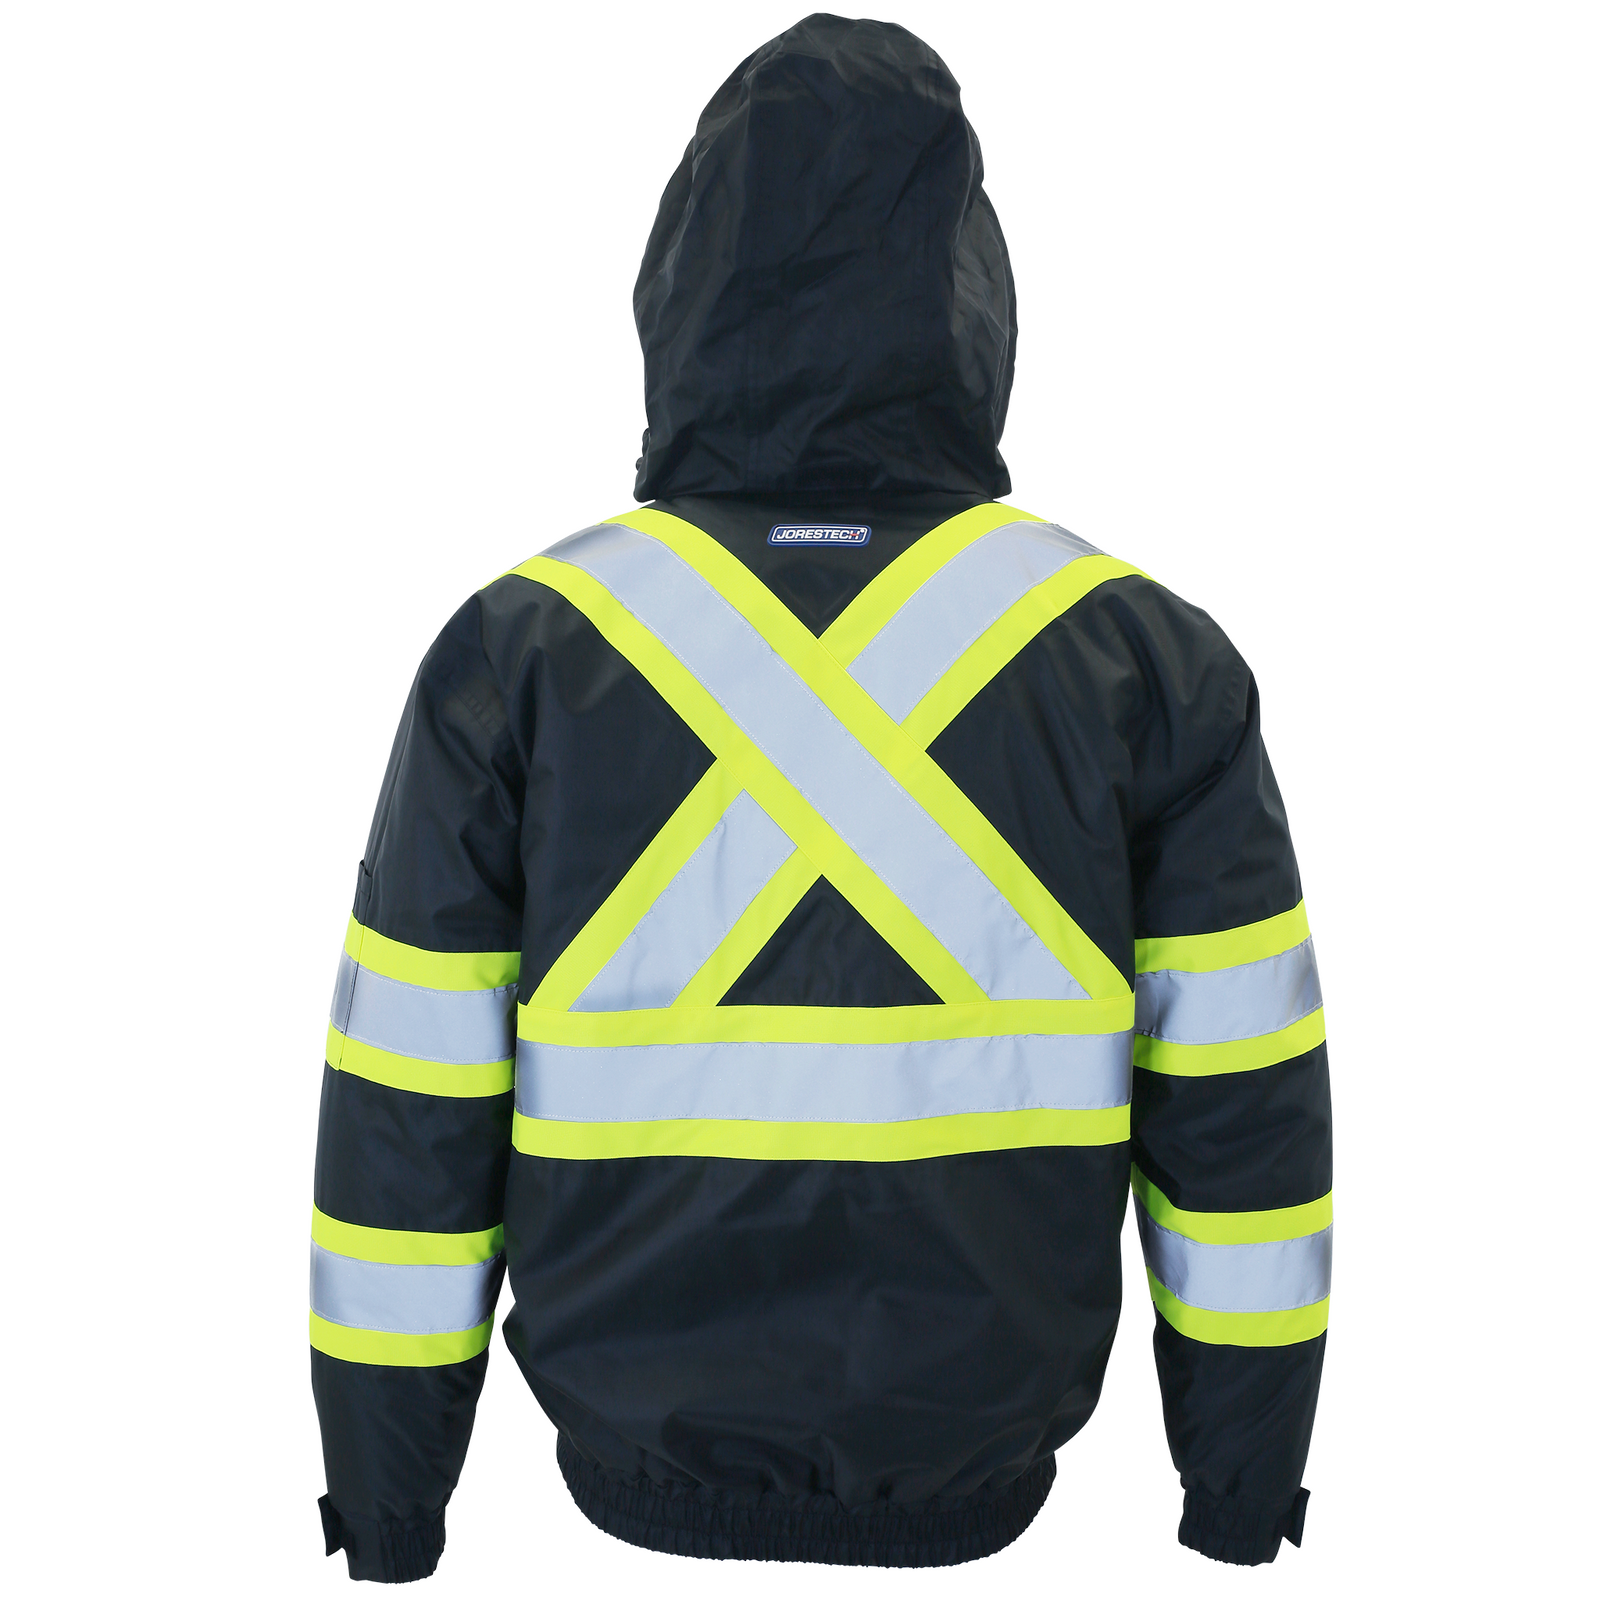 Black and yellow hi-vis two tone safety bomber jacket with lime reflective stripes and a reflective X on the back